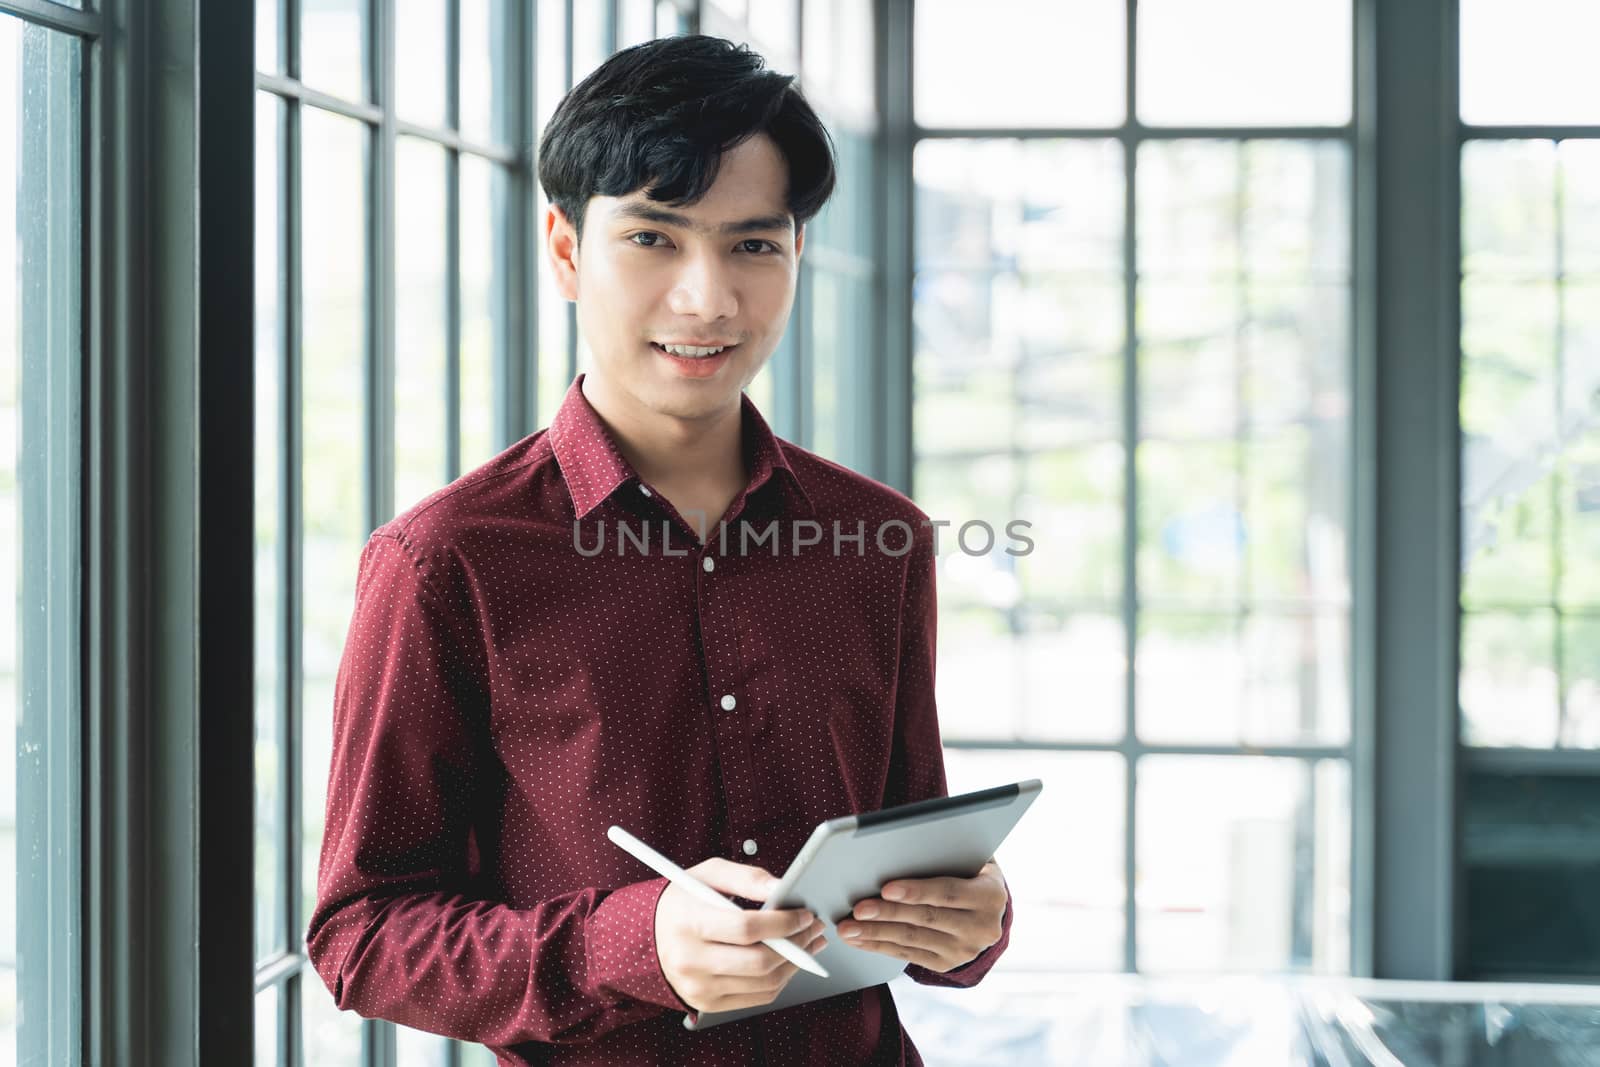 Men are smiling and cheerful. Using the tablet and holding it on by Boophuket